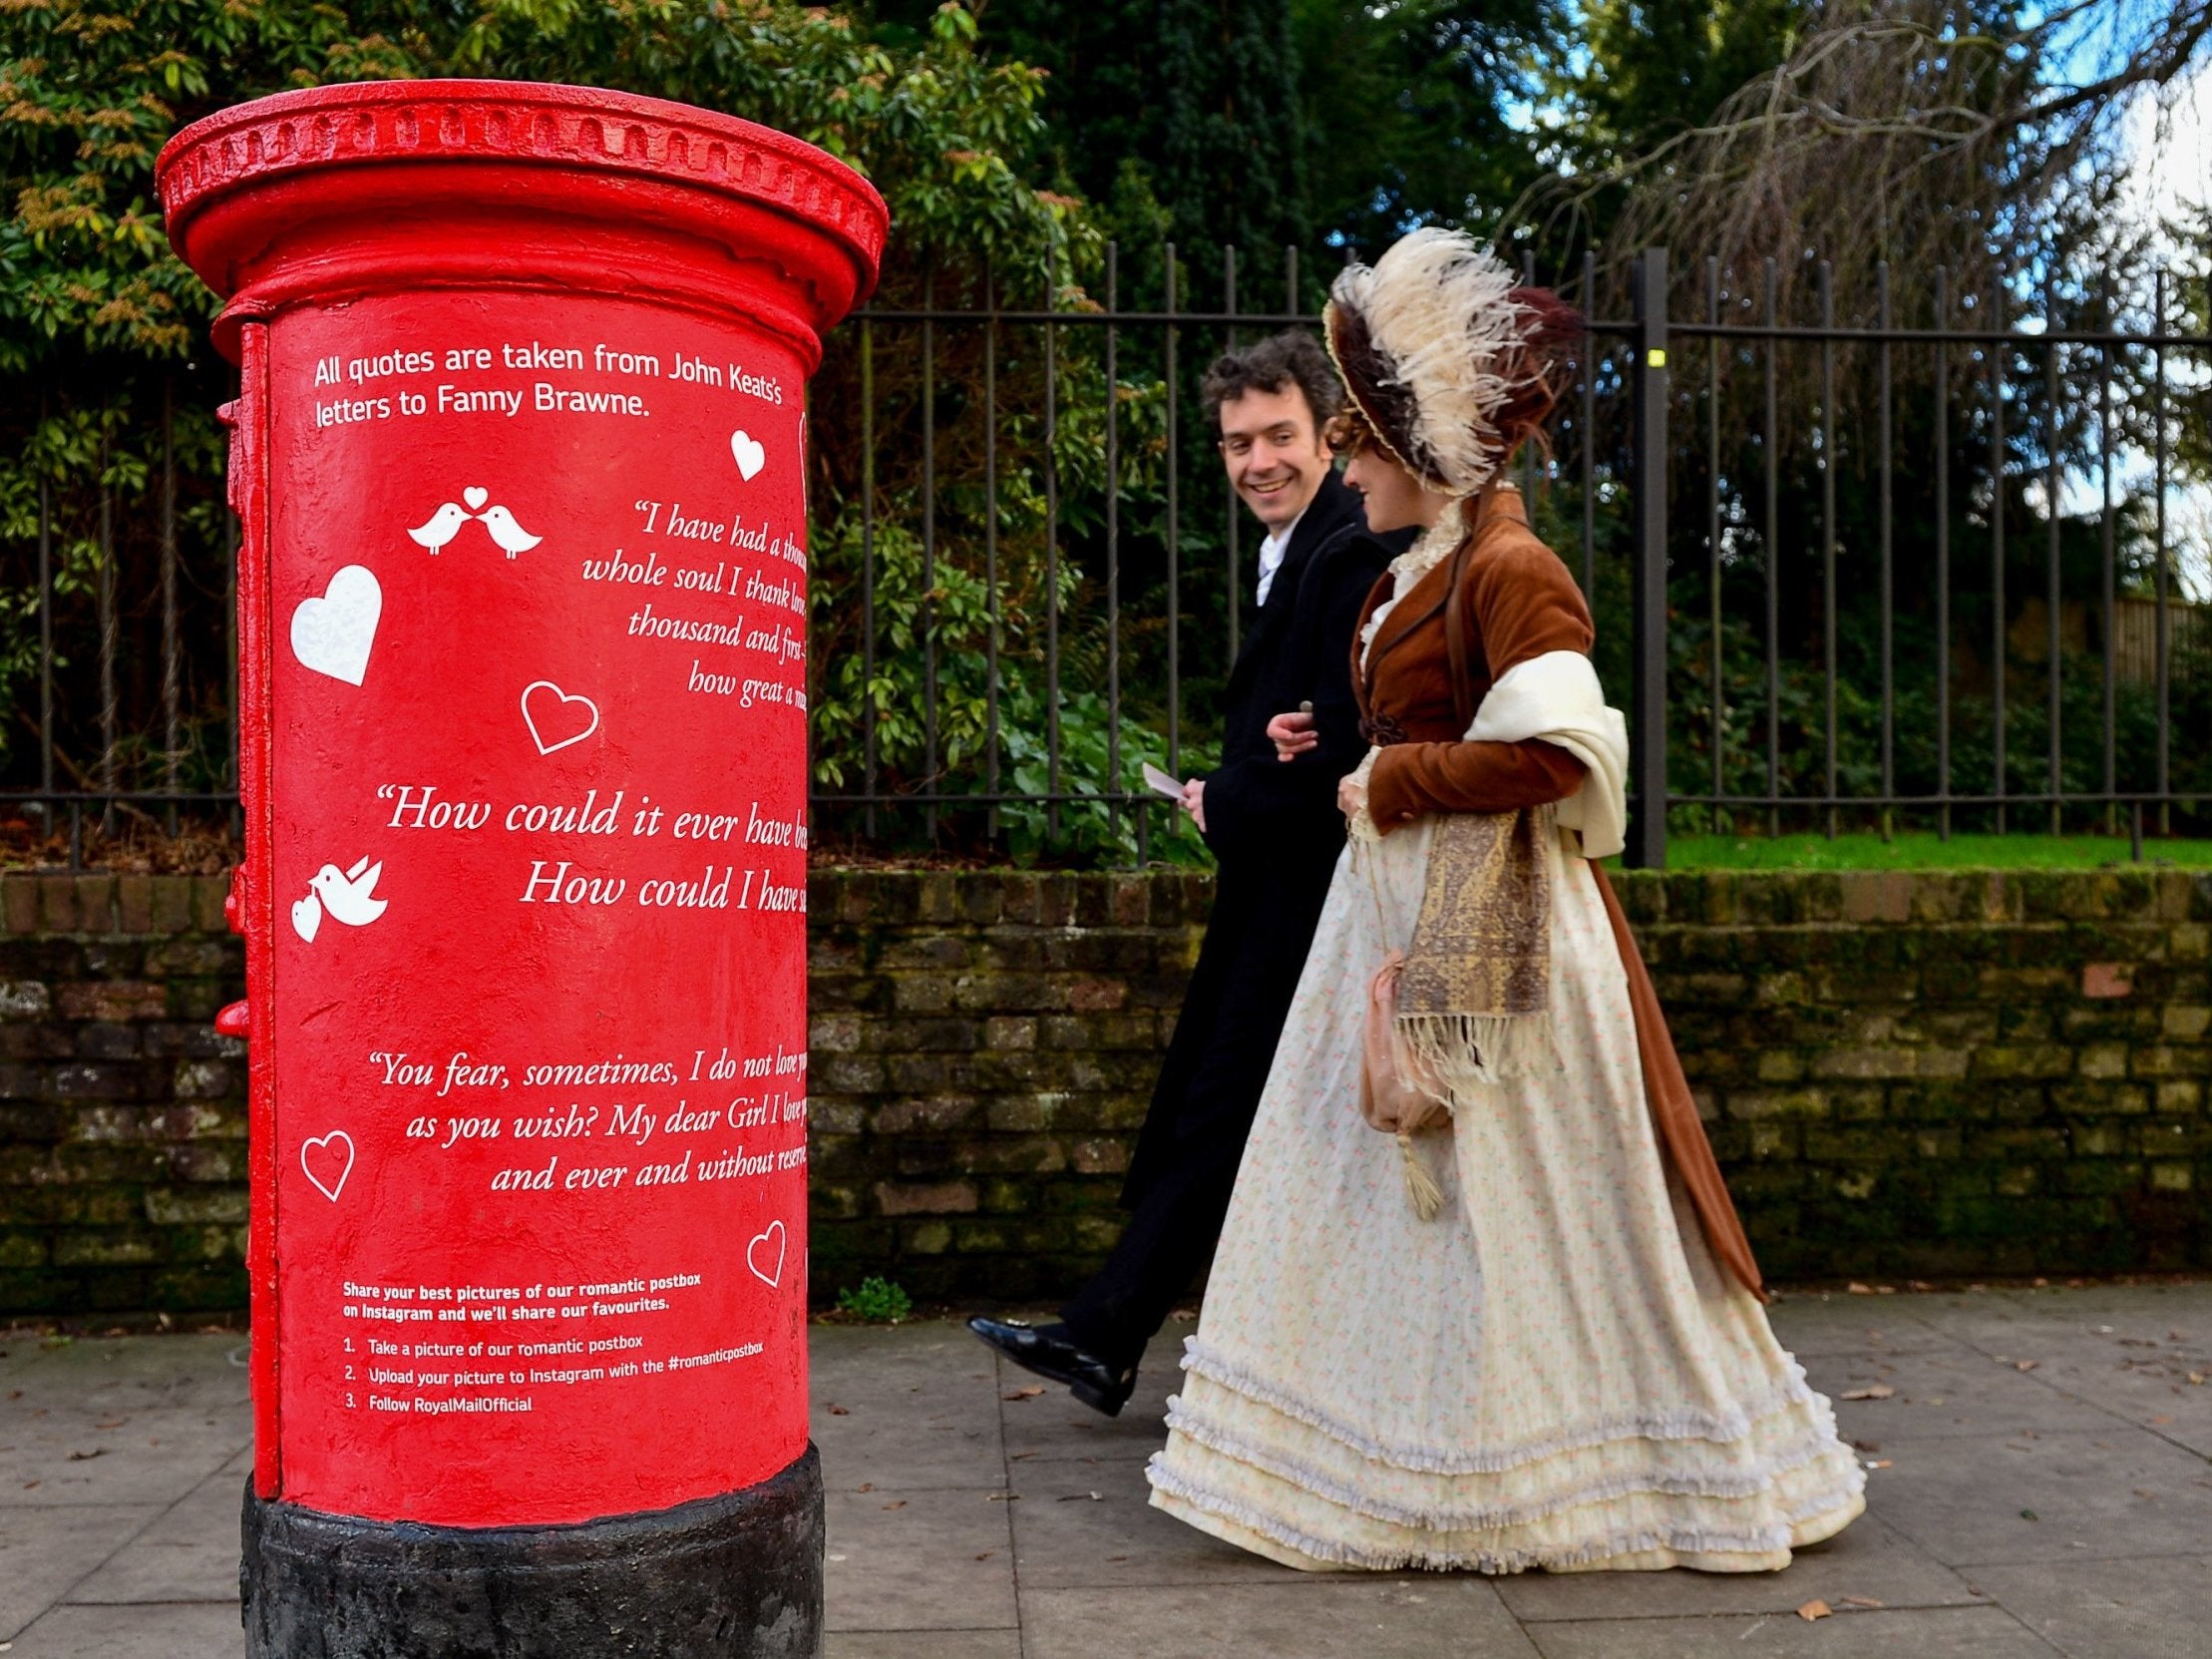 Actors from the Keats Museum walk past one of the adorned boxes